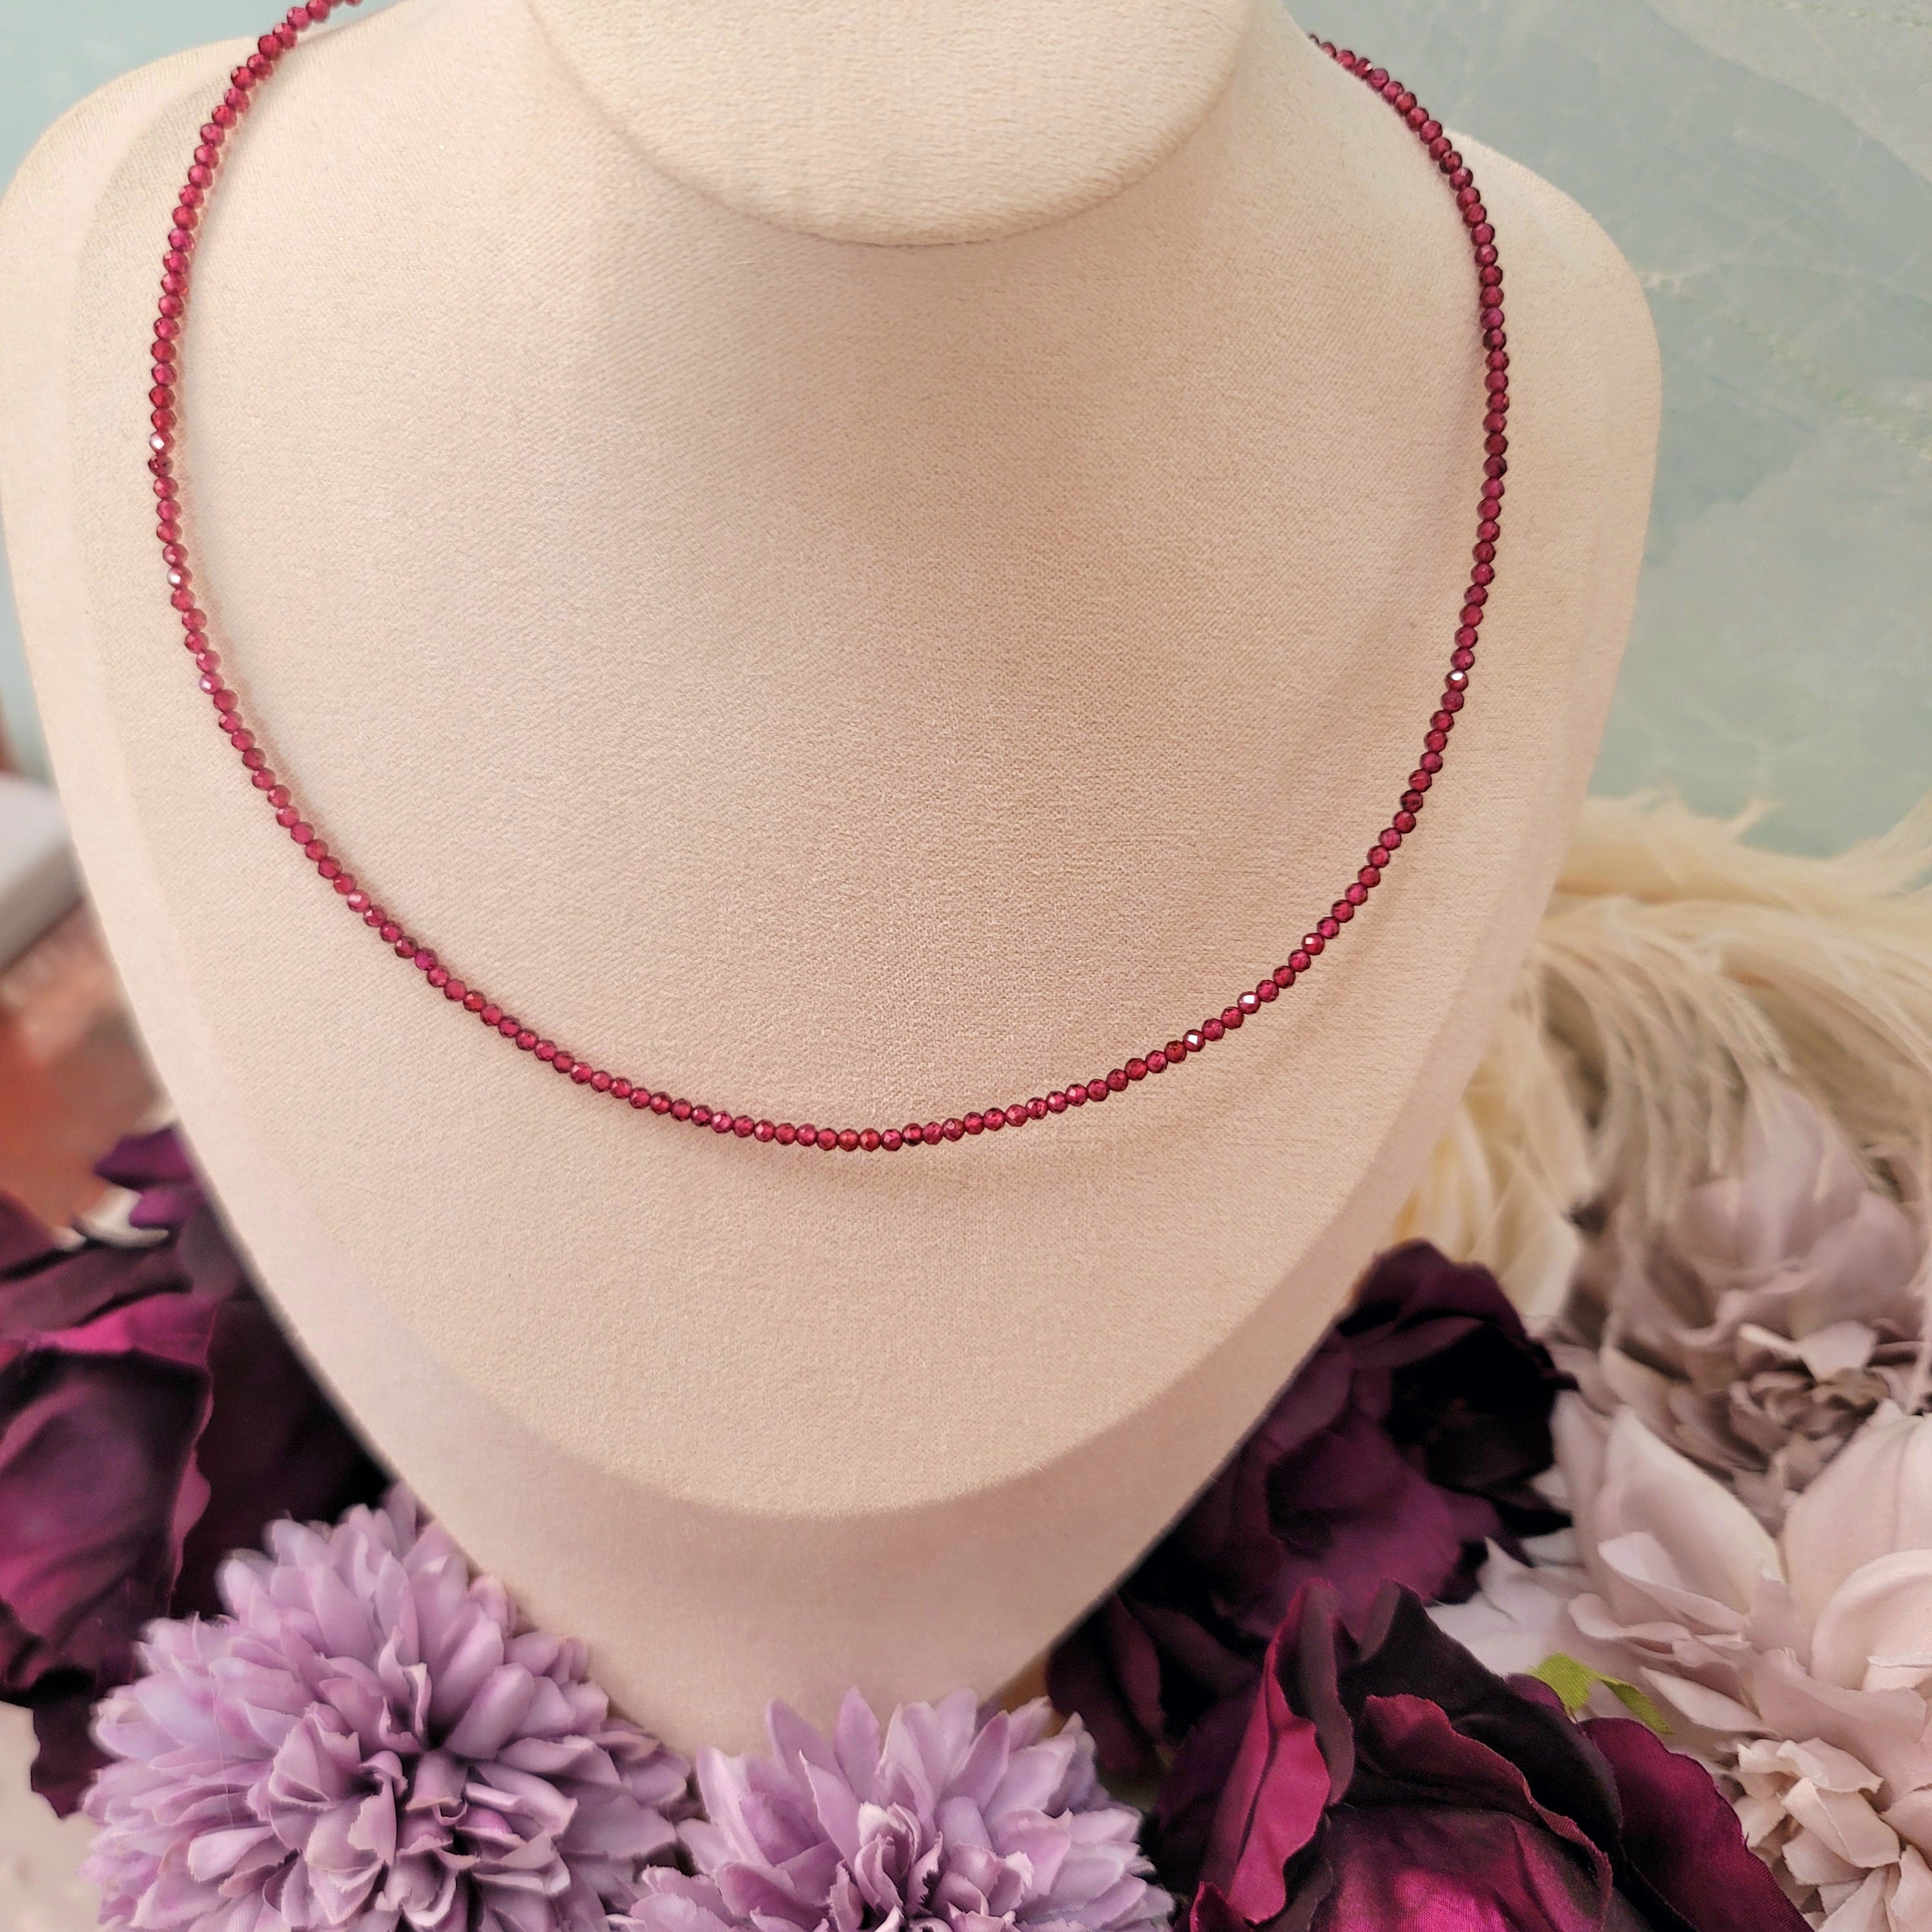 Rhodolite Purple Garnet Micro Faceted Choker/Layering Necklace for Grounding, Health and Strength